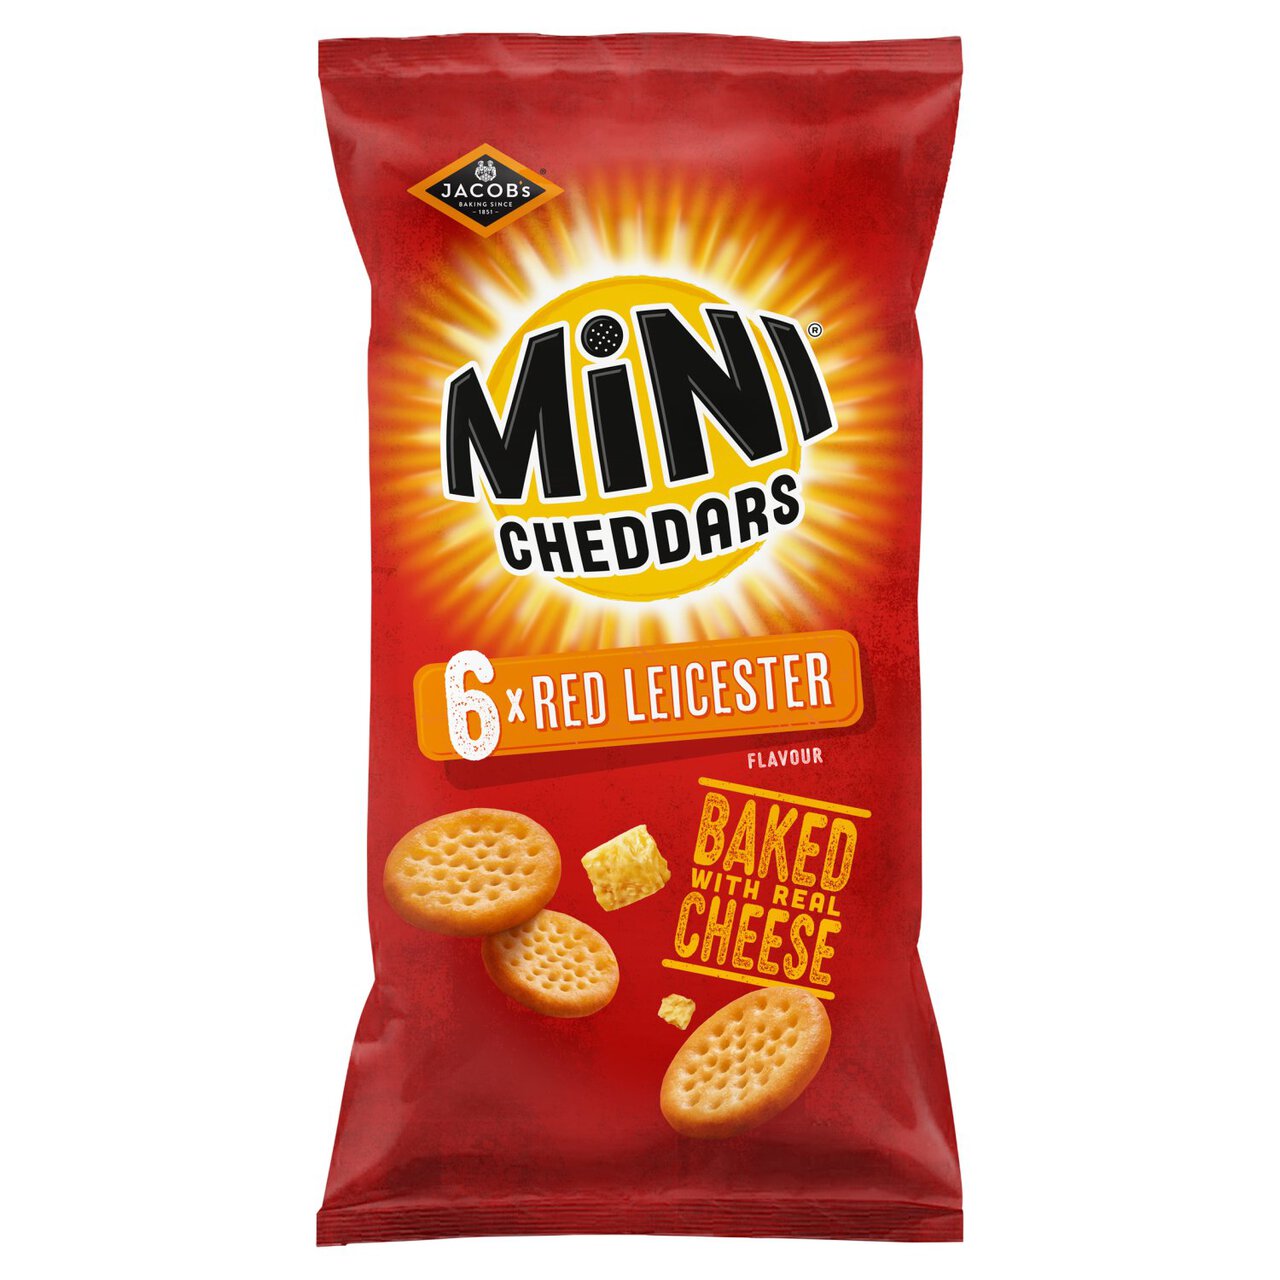 Jacob's Mini Cheddars Red Leicester Multipack Snacks 6 x 23g